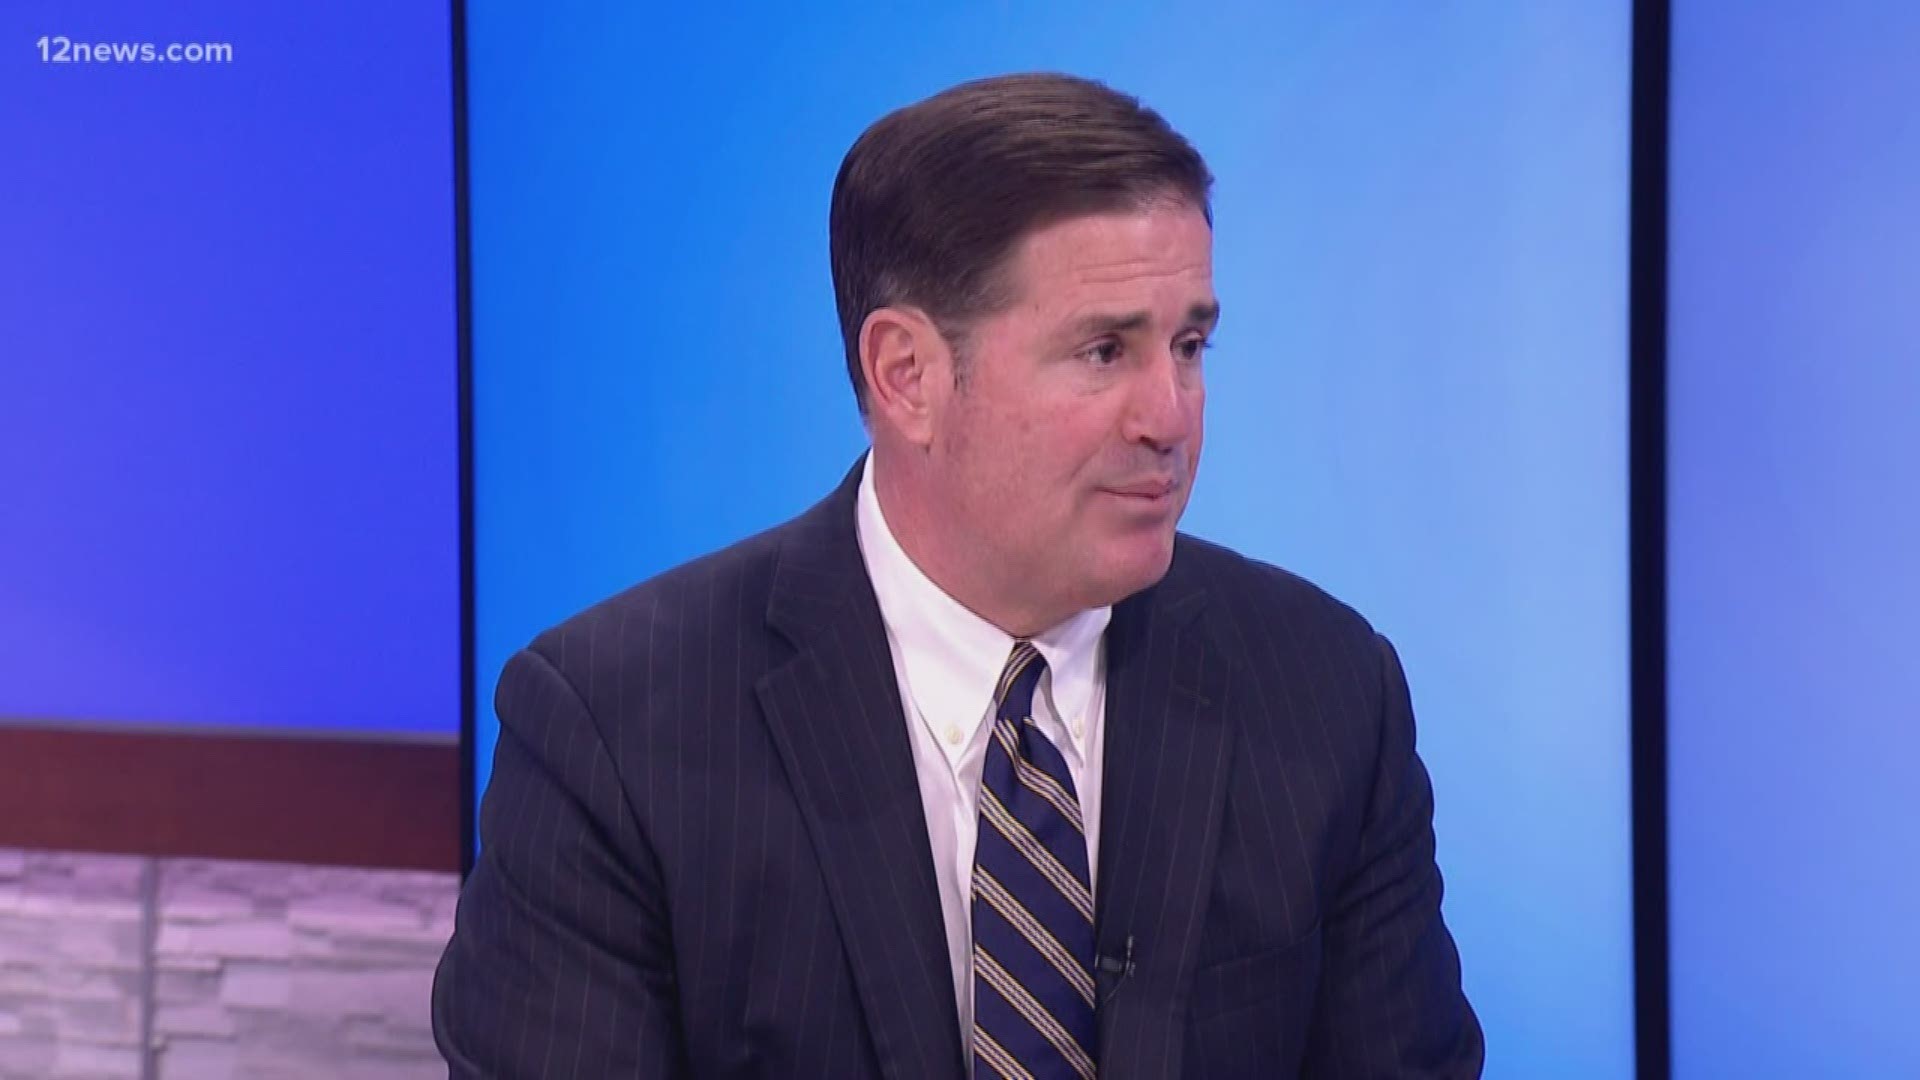 Arizona Governor Doug Ducey says border security is important, and it's also important to have respect for tribal sites. He says both are possible.